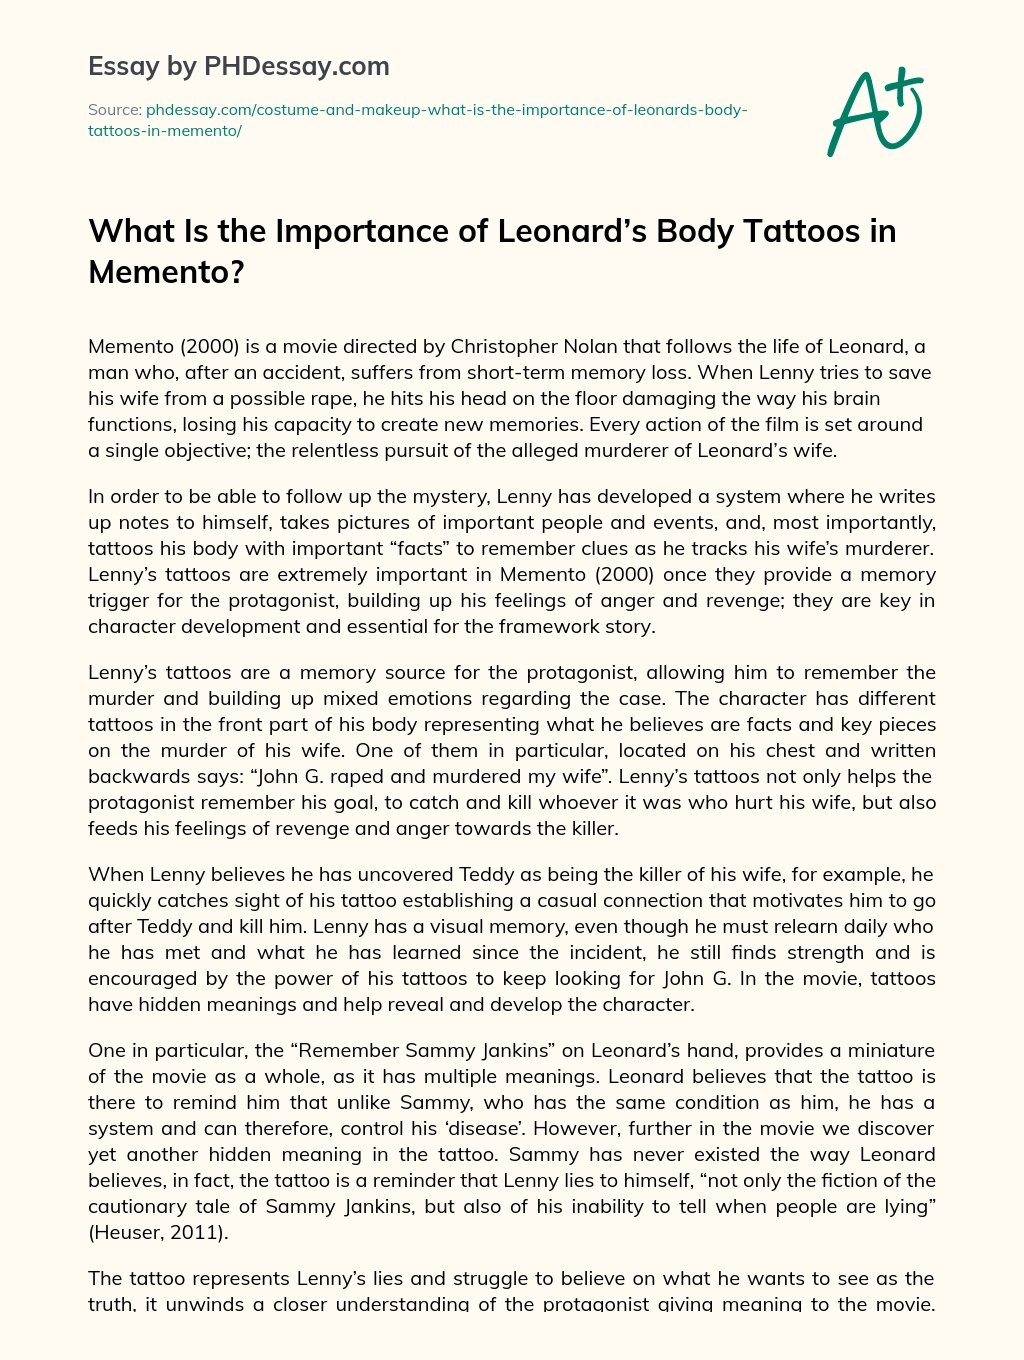 What Is the Importance of Leonard’s Body Tattoos in Memento? essay